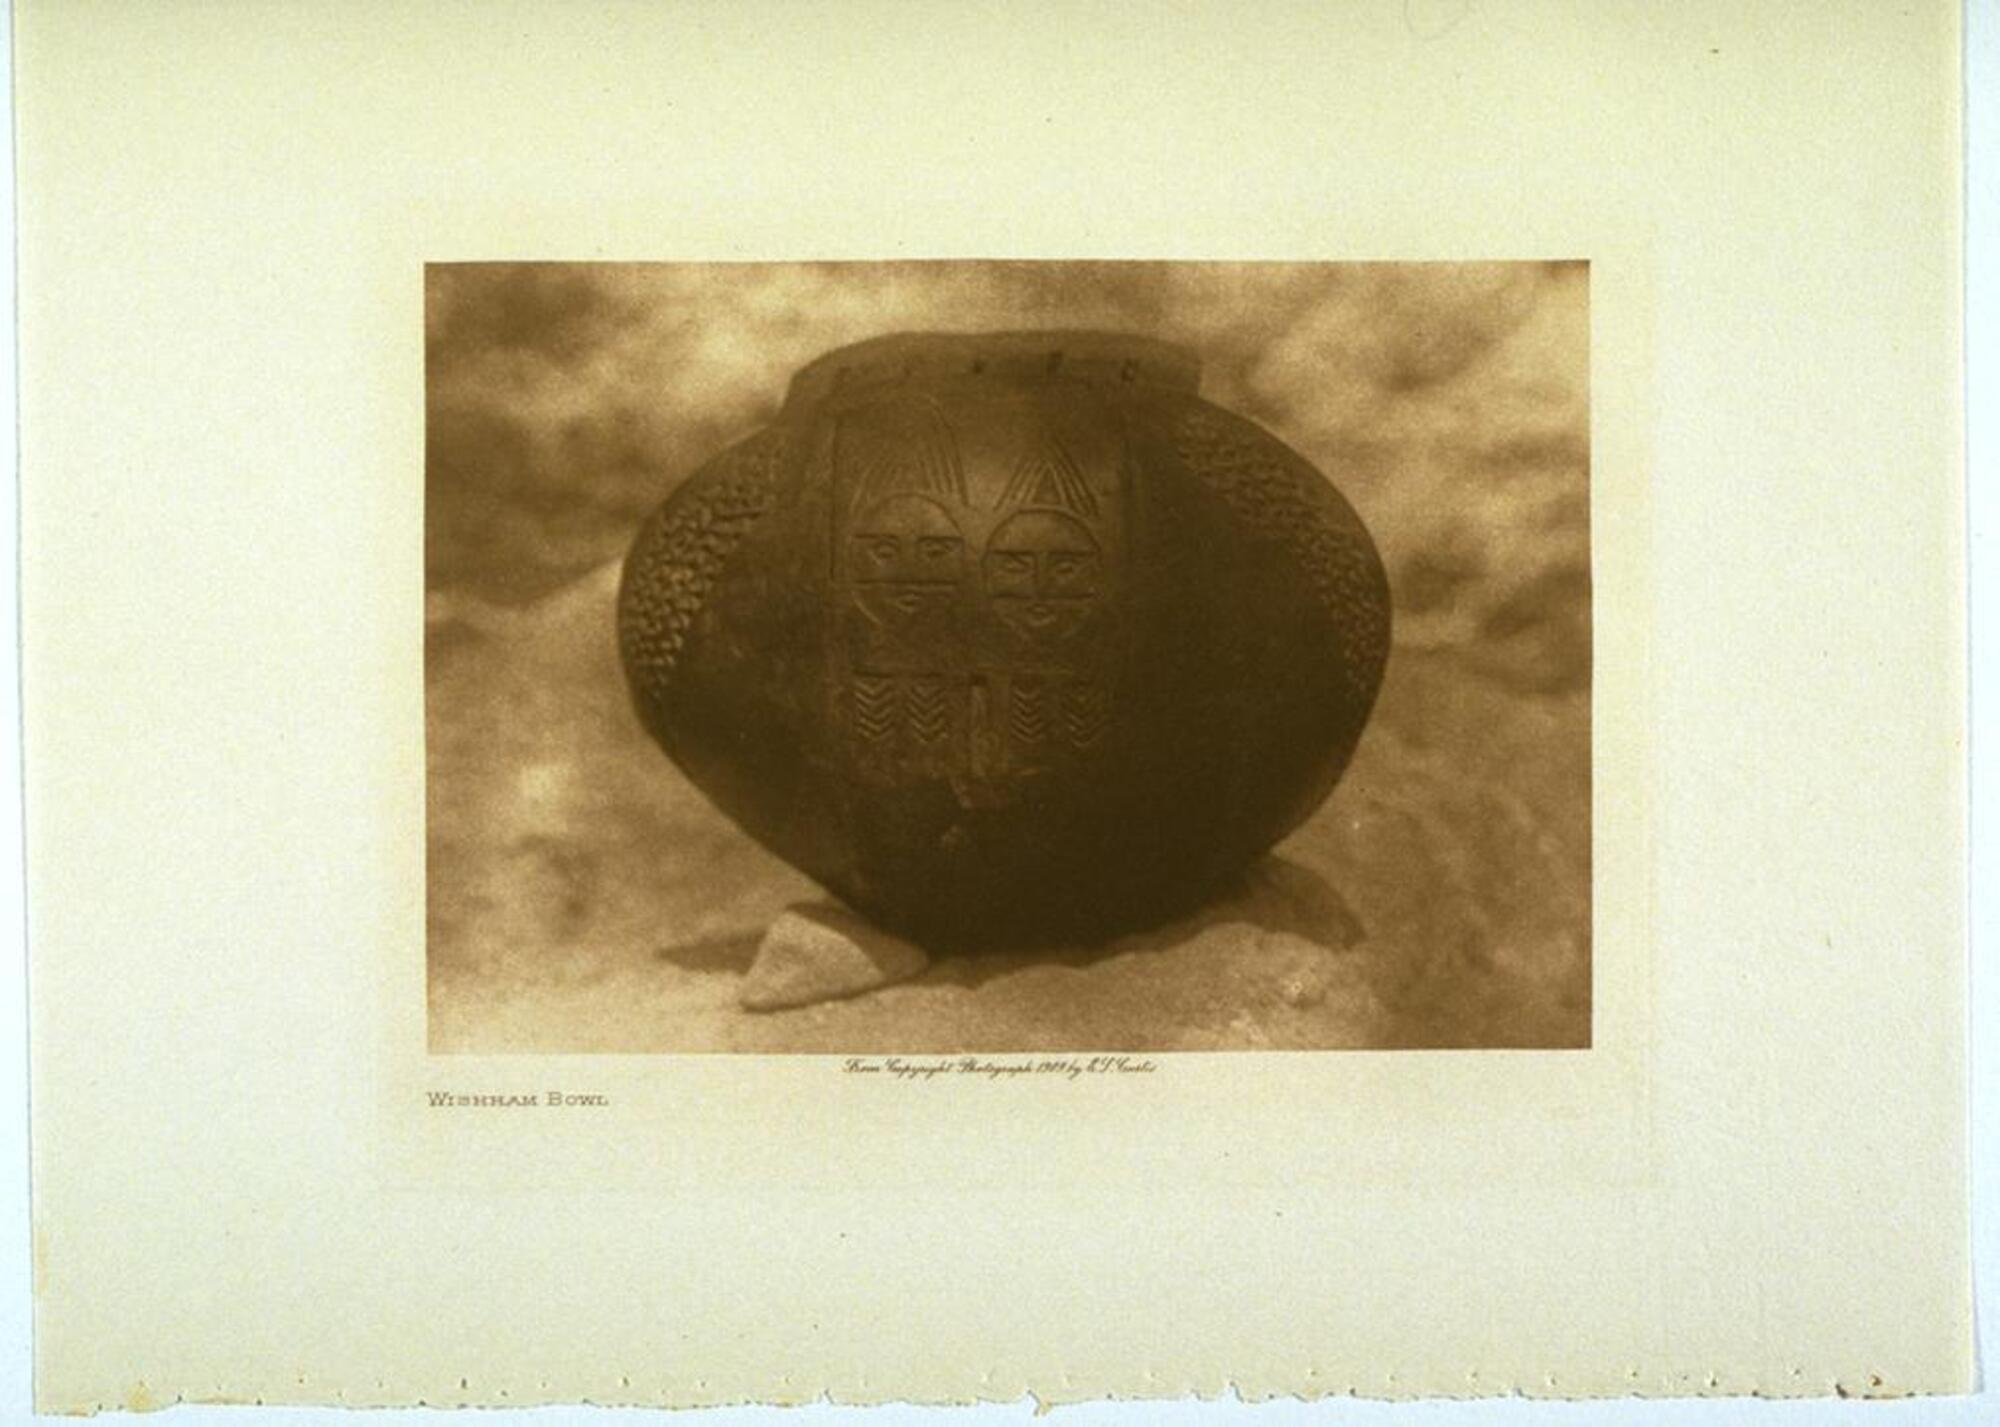 A photograph of a hand-made ceramic bowl placed on a desert rock. Two abstract human figures are etched into the surface of the bowl, with decorative textures carved into the surface on either side.